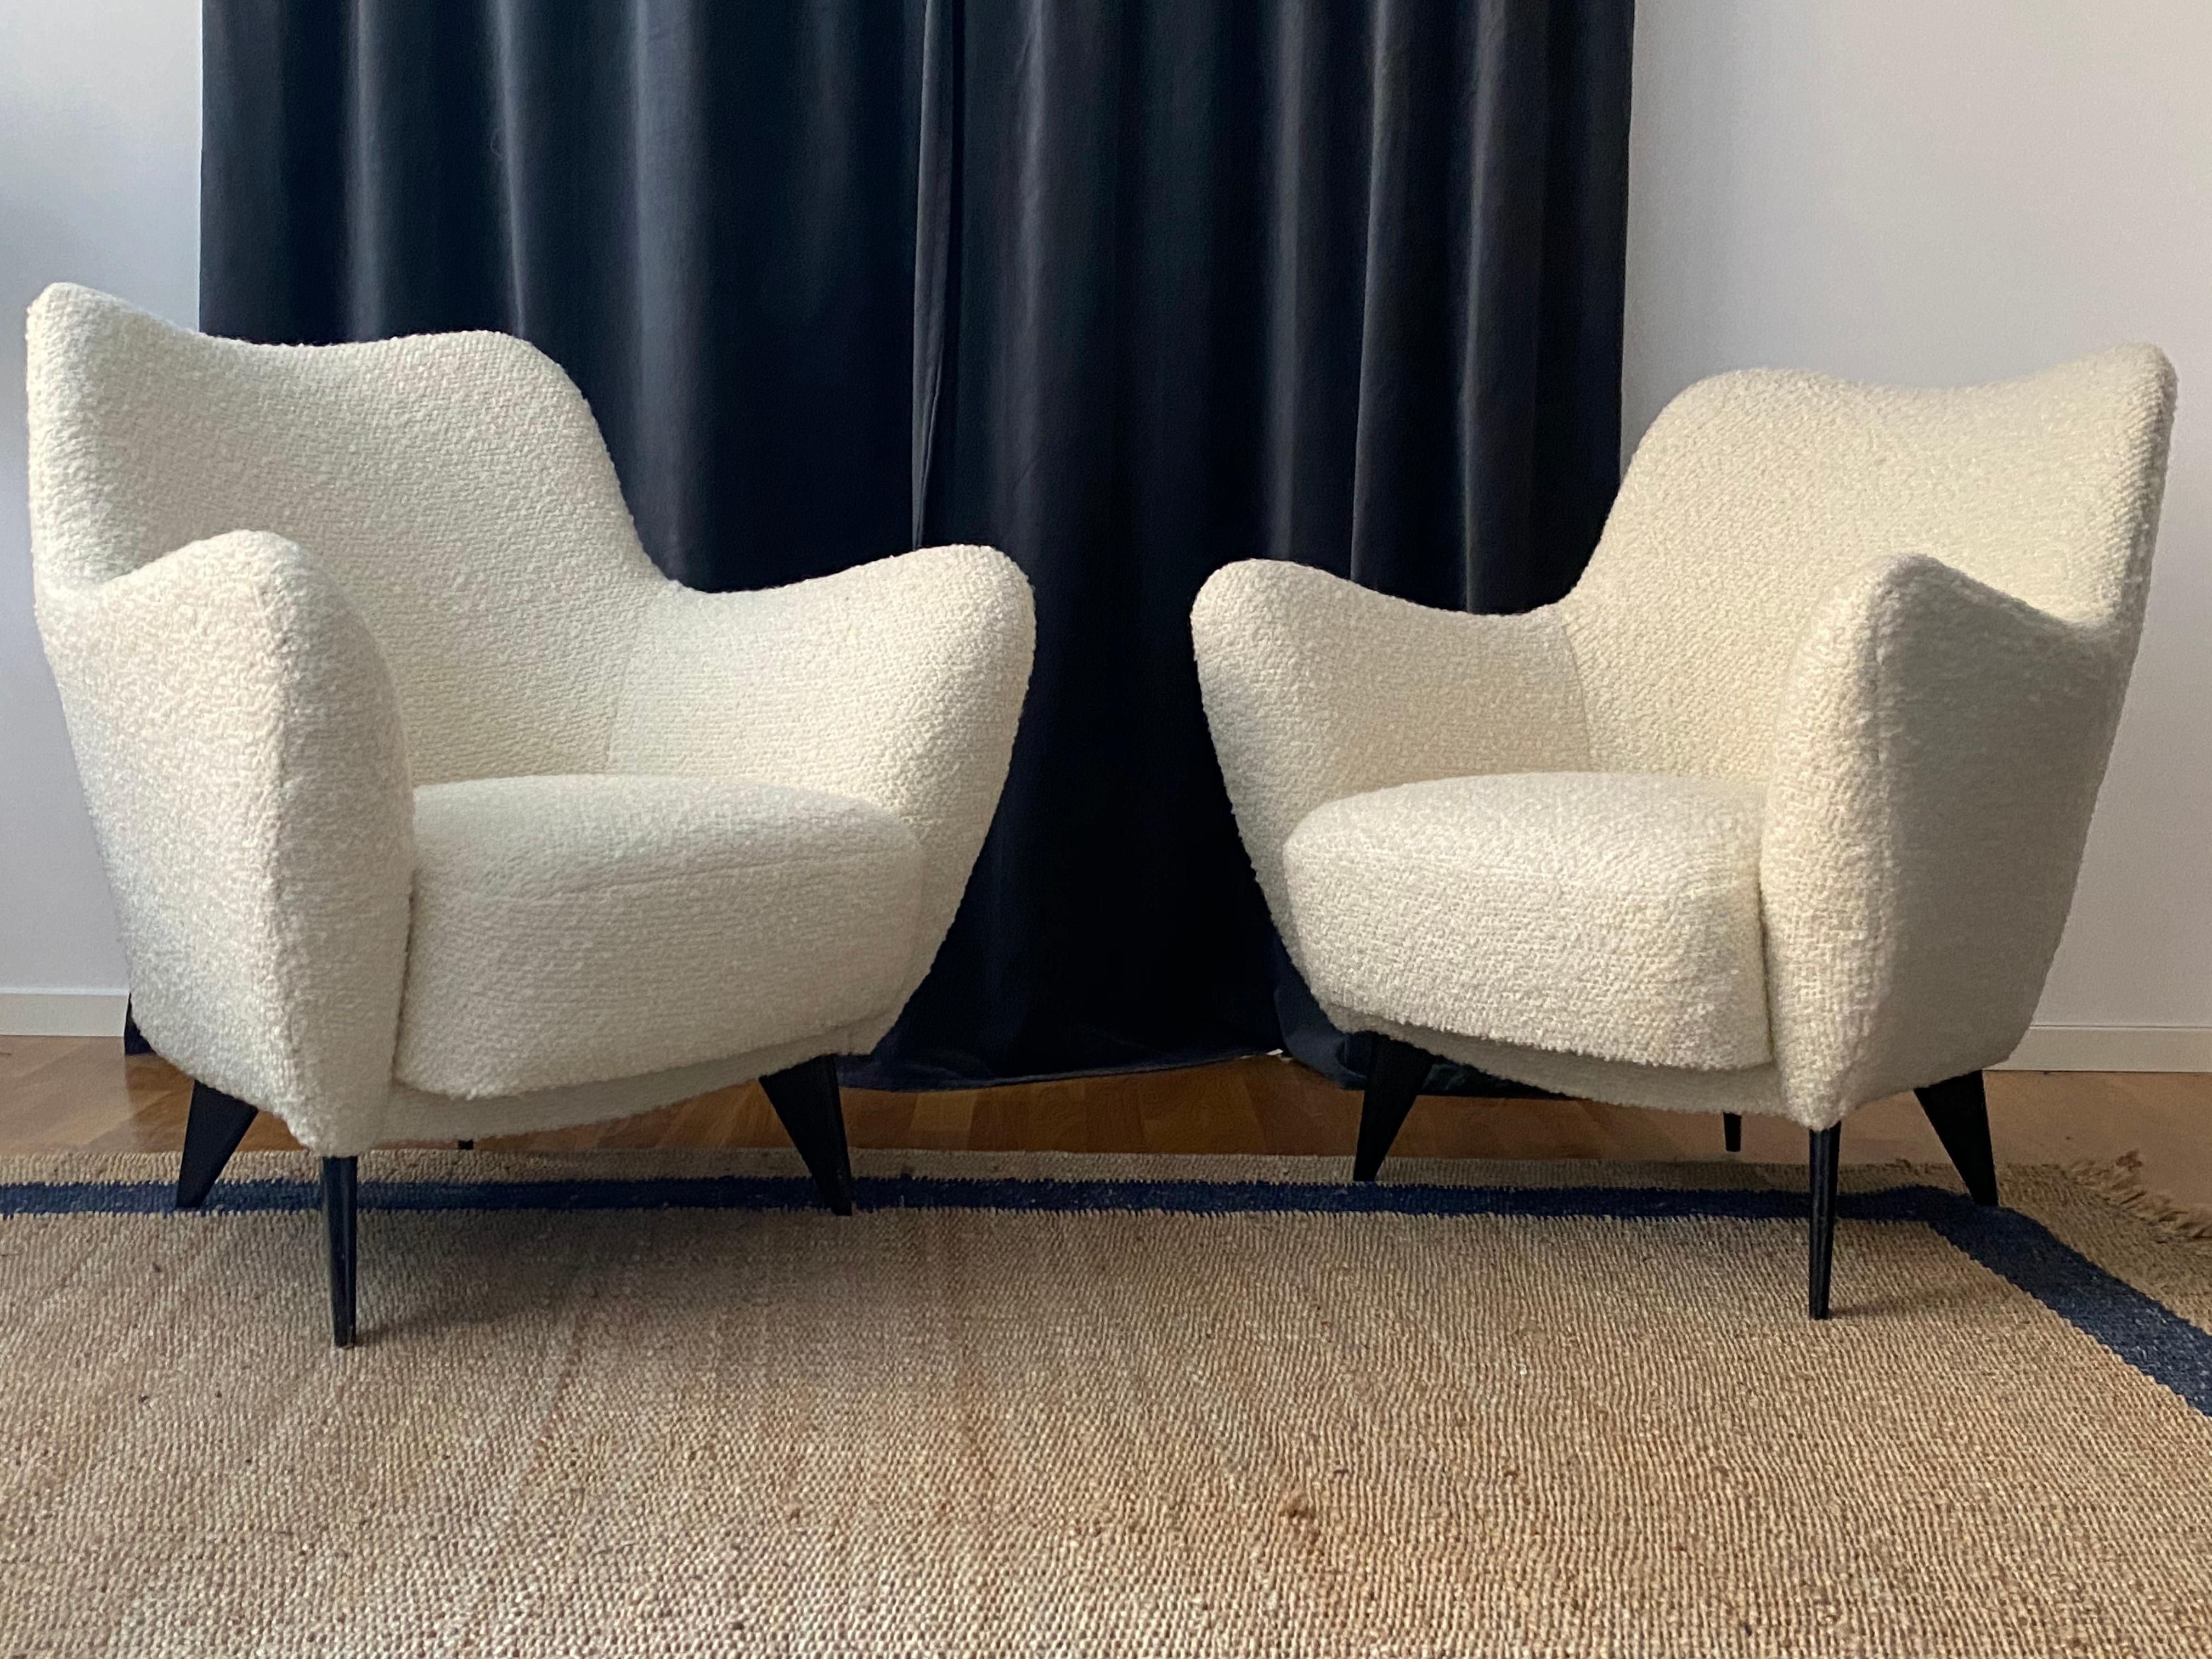 A pair of organic lounge chairs / armchairs. Designed by Guglielmo Veronesi. Produced by I.S.A. Bergamo, Italy, 1950s. Fully restored and reupholstered in a brand new Pierre Frey bouclé fabric. Legs in black painted walnut.

Other designers